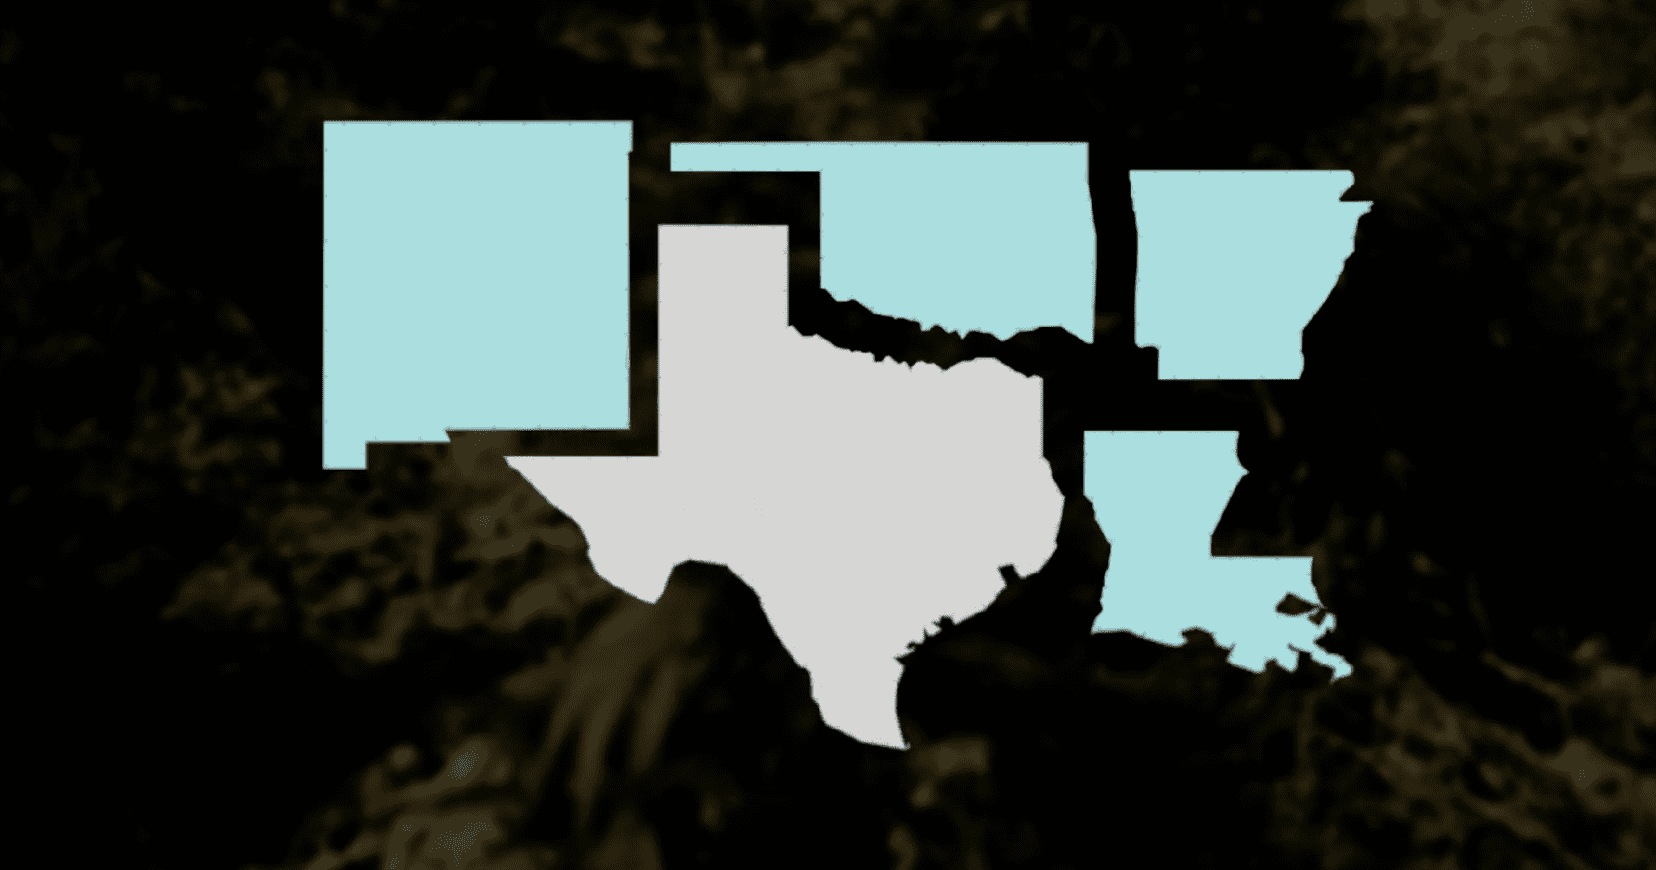 Video production showing the shapes of New Mexico, Oklahoma, Arkansas, and Louisiana overlayed onto a photo of cannabis.